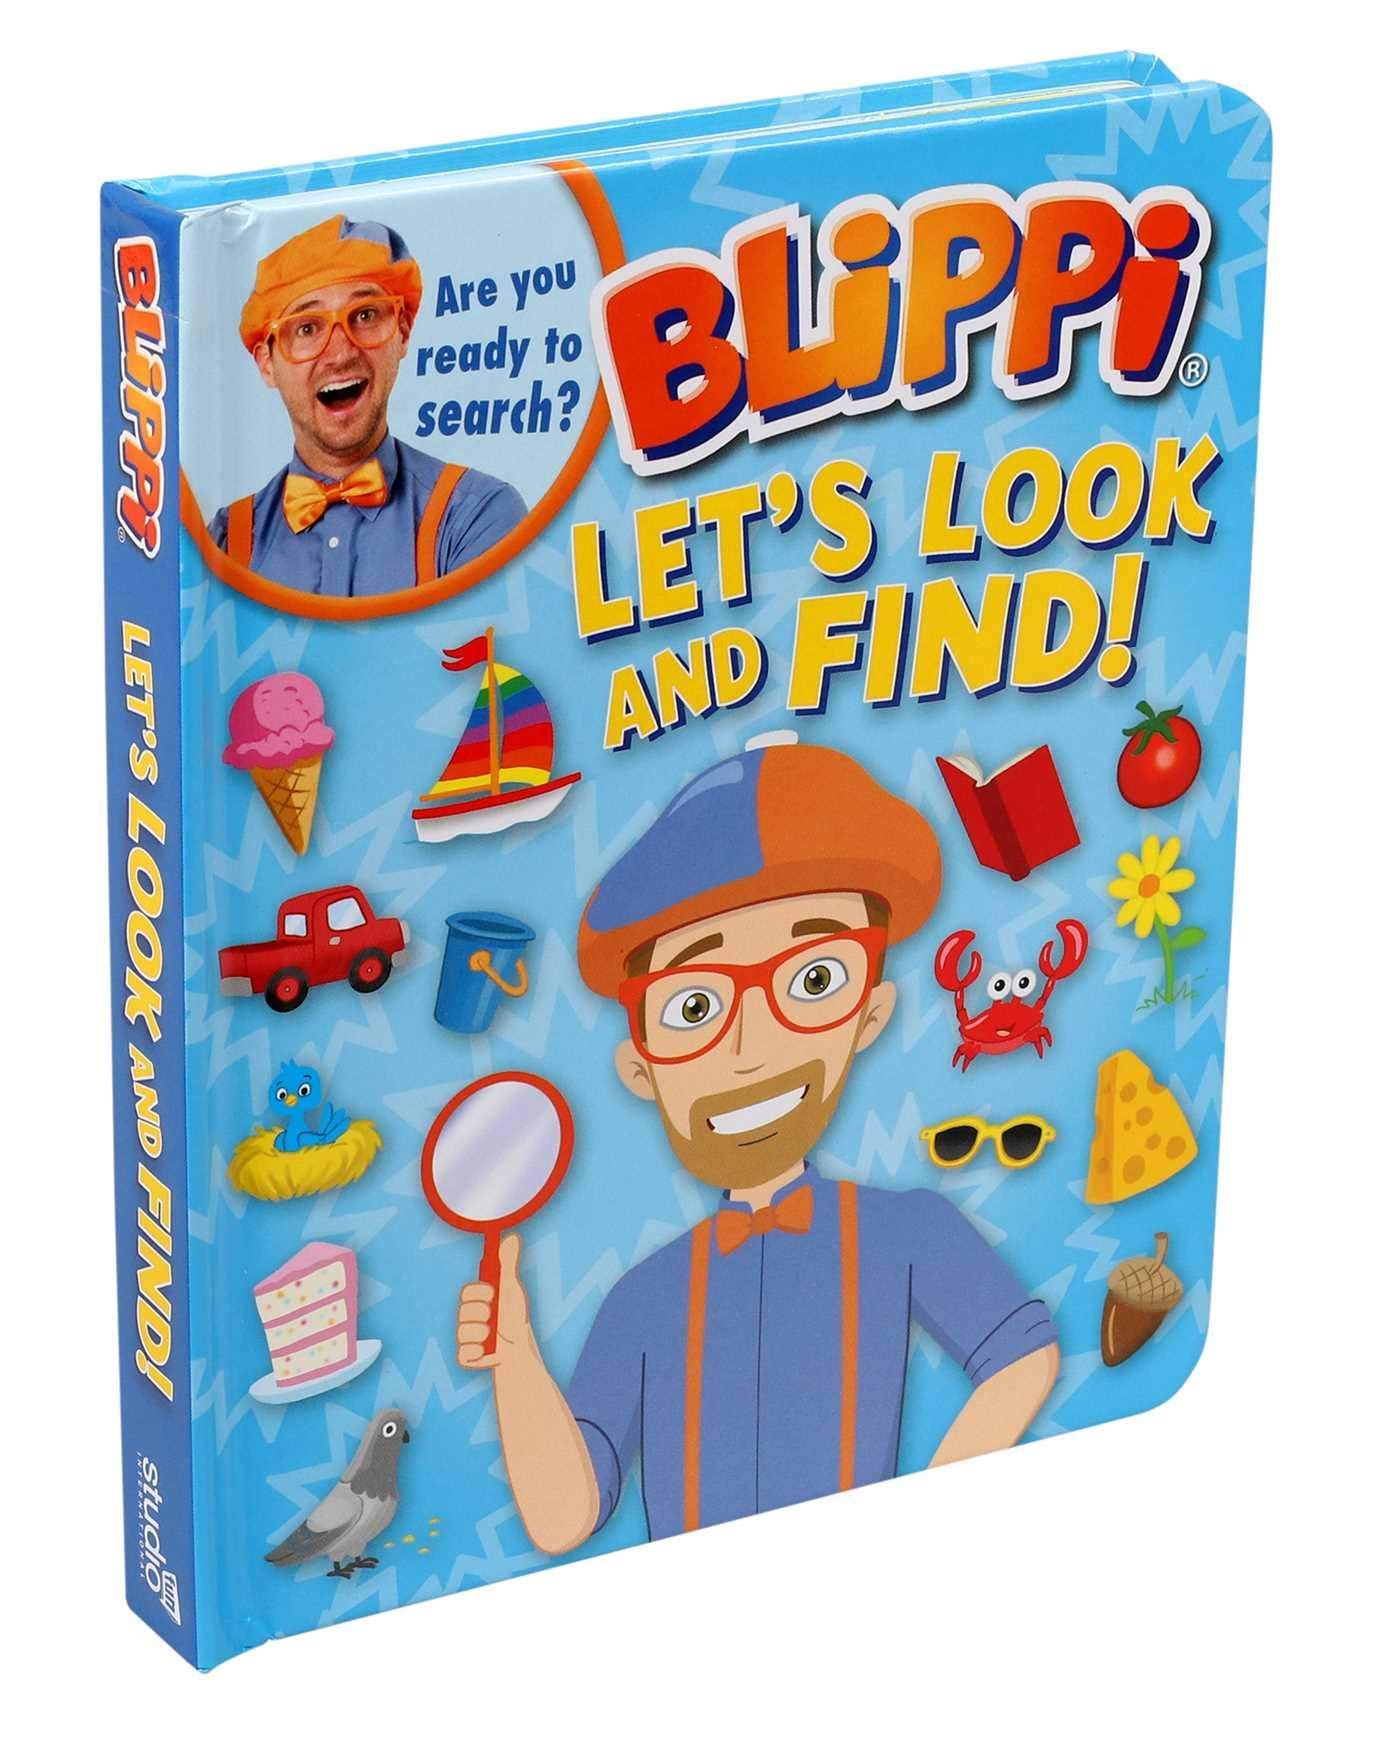 Blippi: Let's Look and Find!



Board book – Lift the flap, March 31, 2020 | Amazon (US)